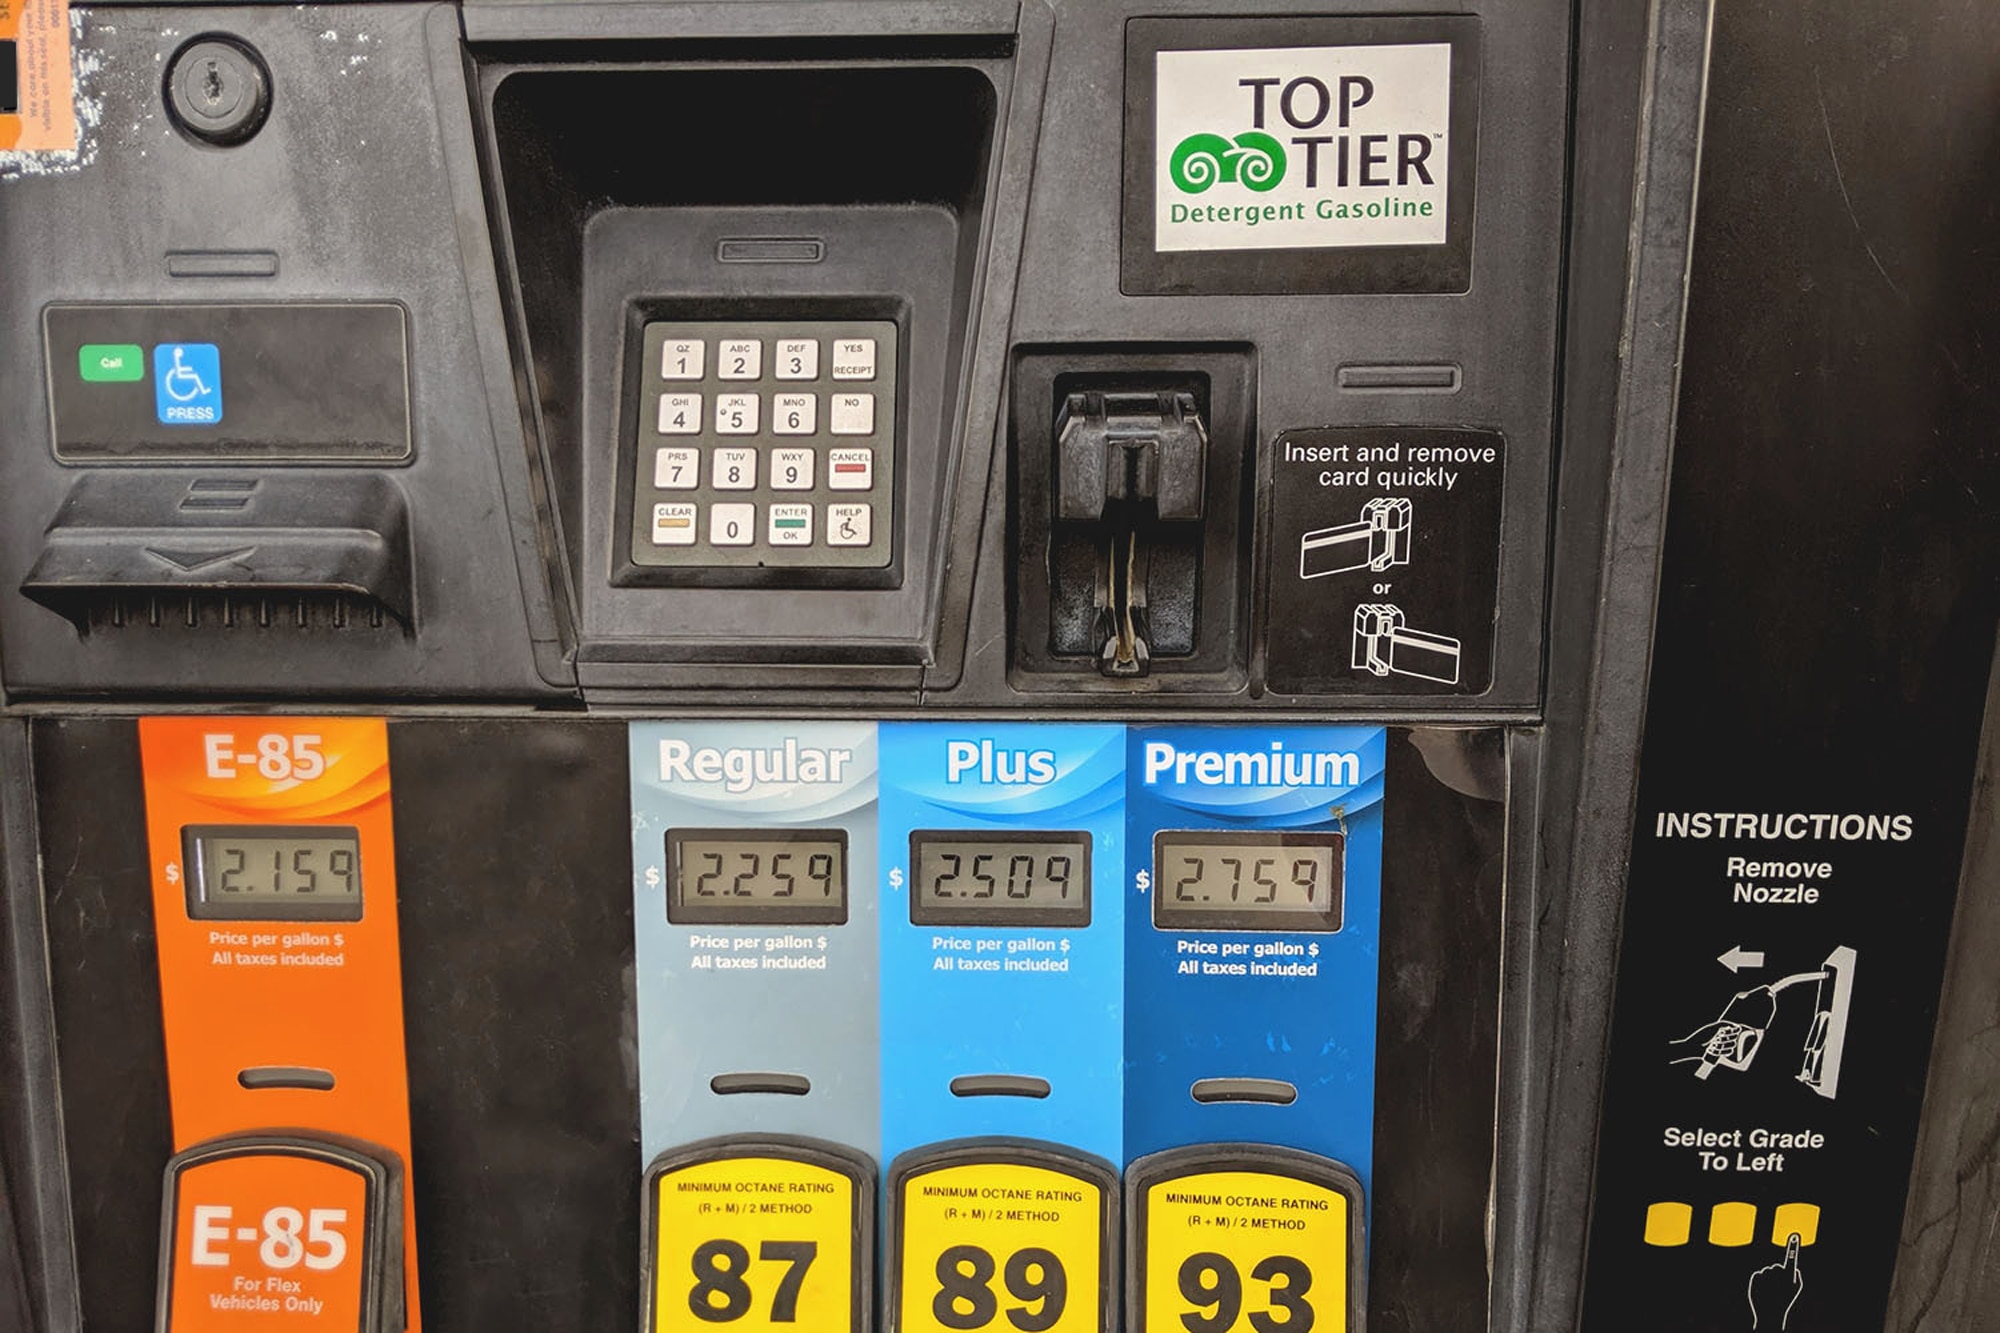 Is Top Tier Gas a legitimate product for my vehicle? - Guttman Energy